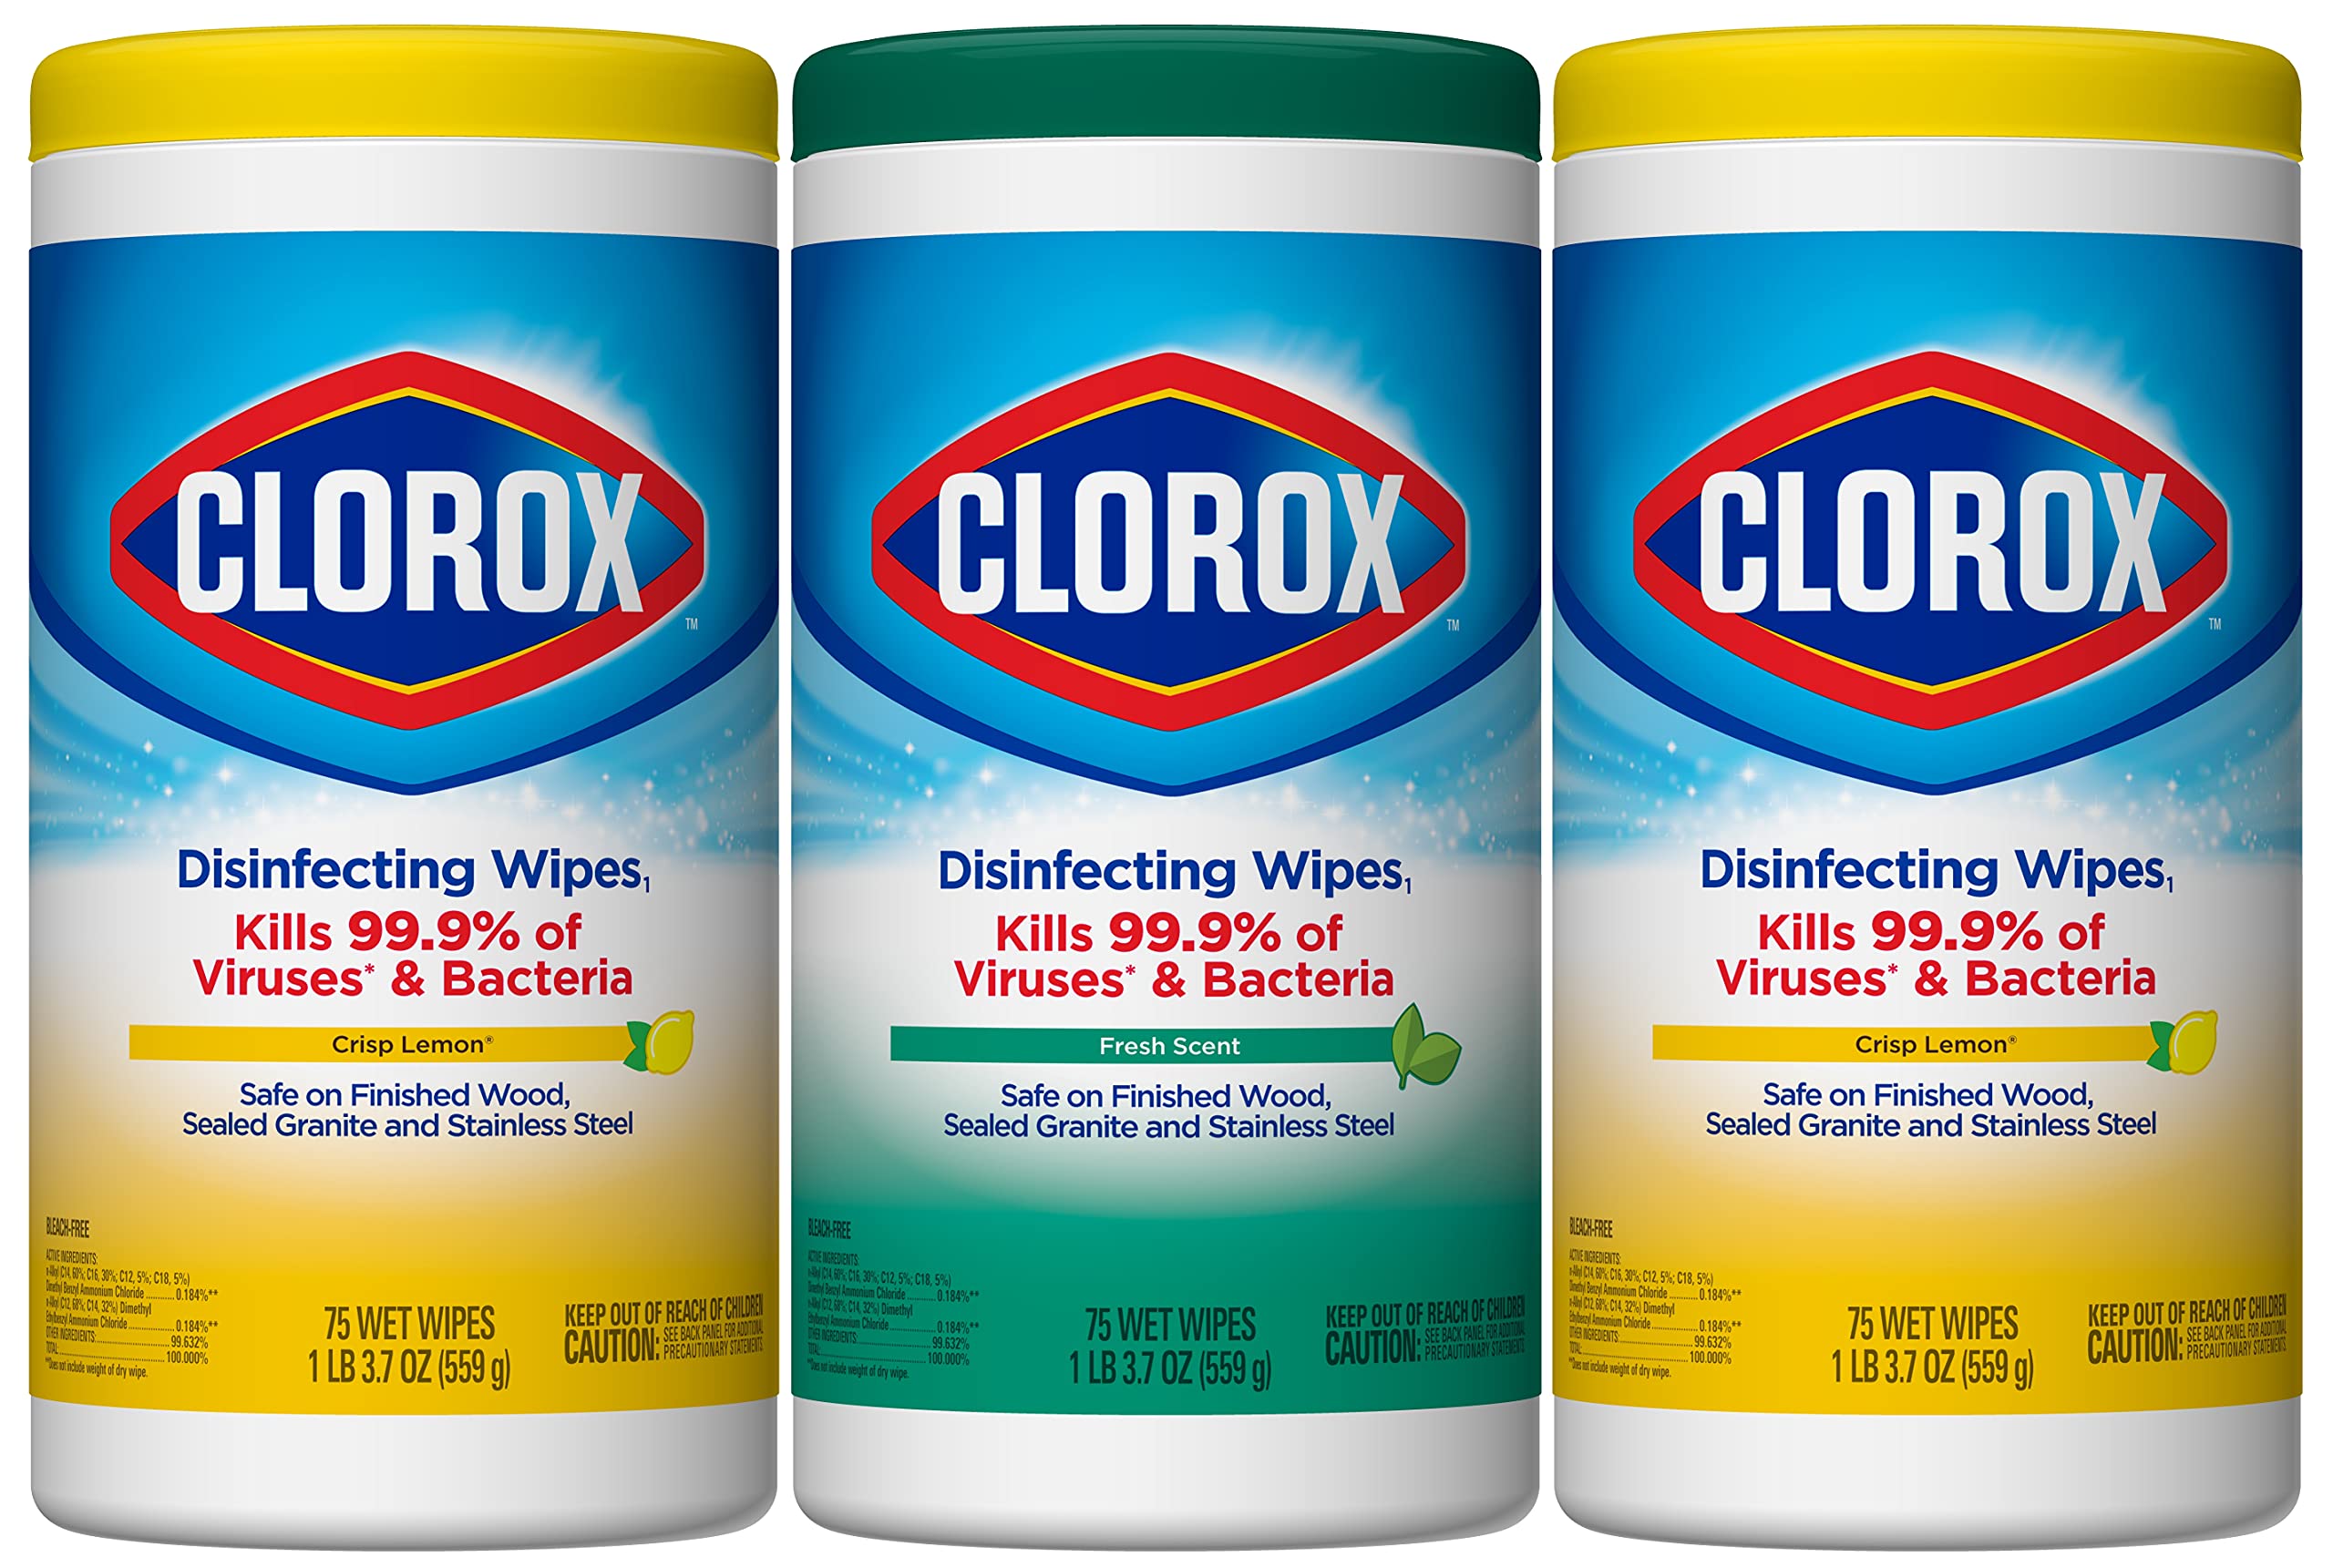 Clorox Disinfecting Wipes Value Pack, 75 Ct Each, Pack of 3 for $7.49 at Amazon